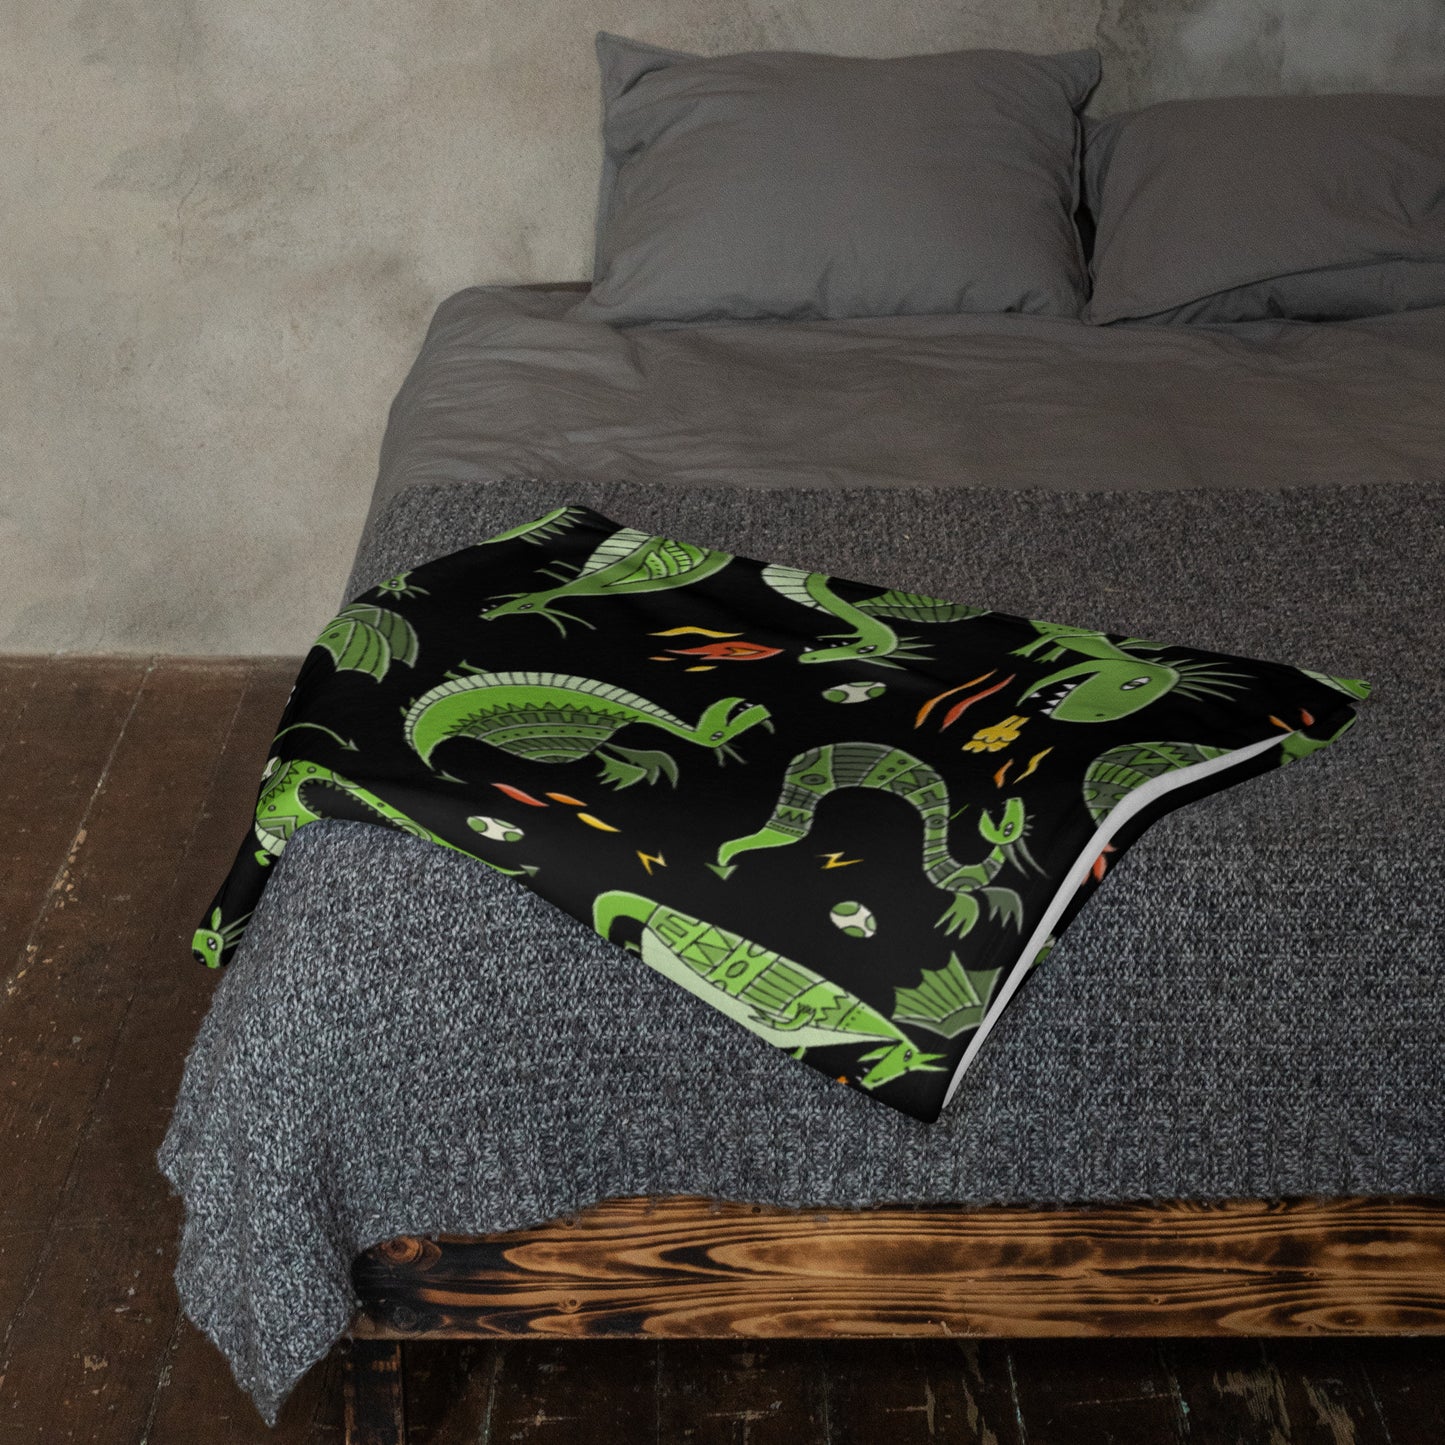 Black blanket 50х60 with funny green dragons on bed